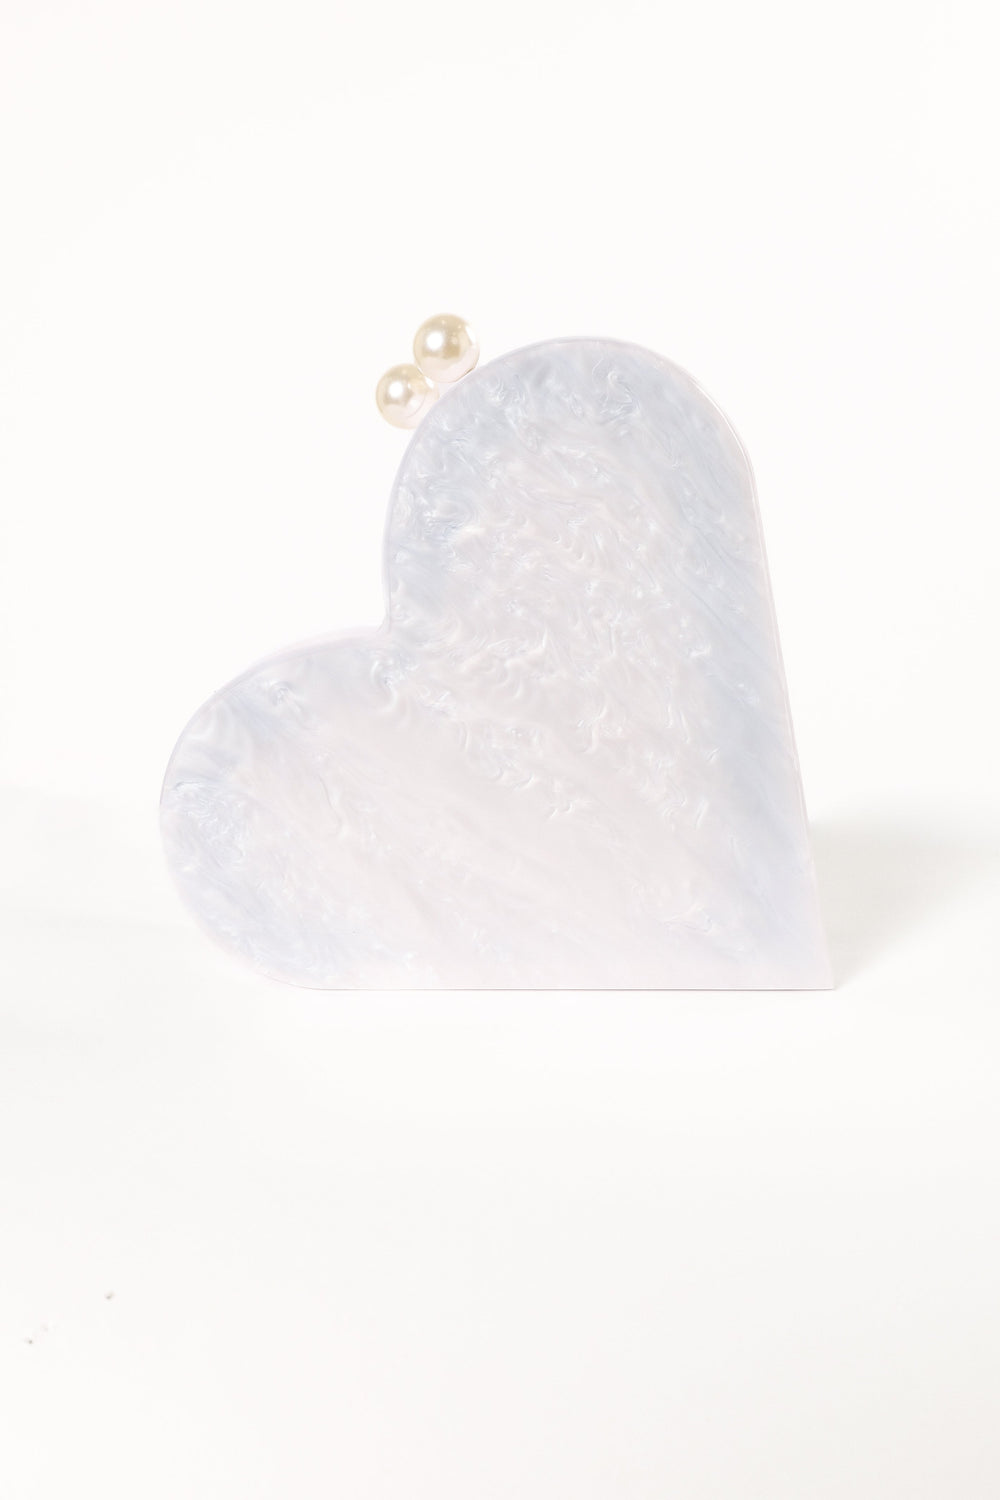 ACCESSORIES Heart Shaped Bag - White